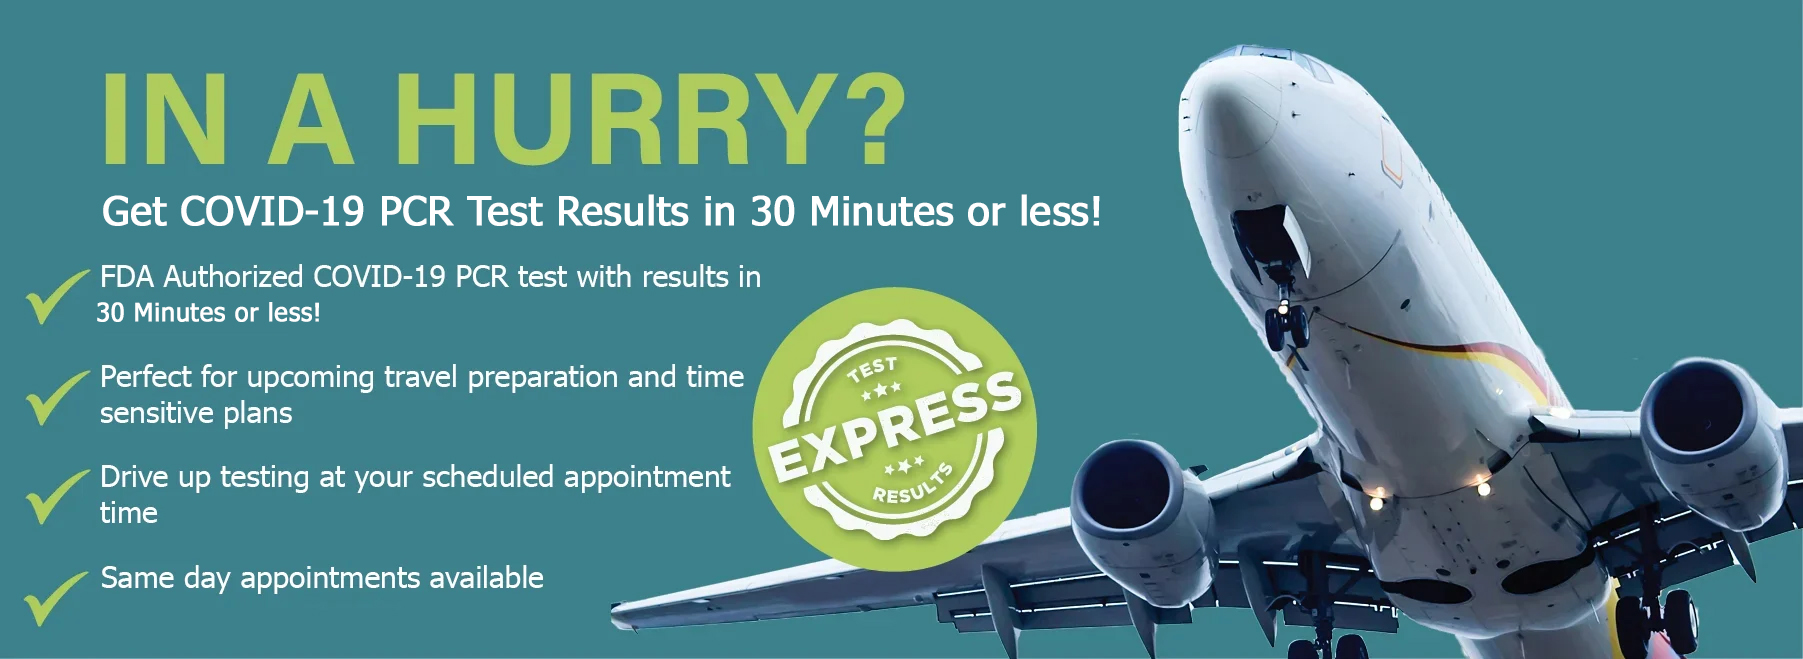 Express - Same Day Covid-19 PCR Testing - Get Results in 30 minutes or less